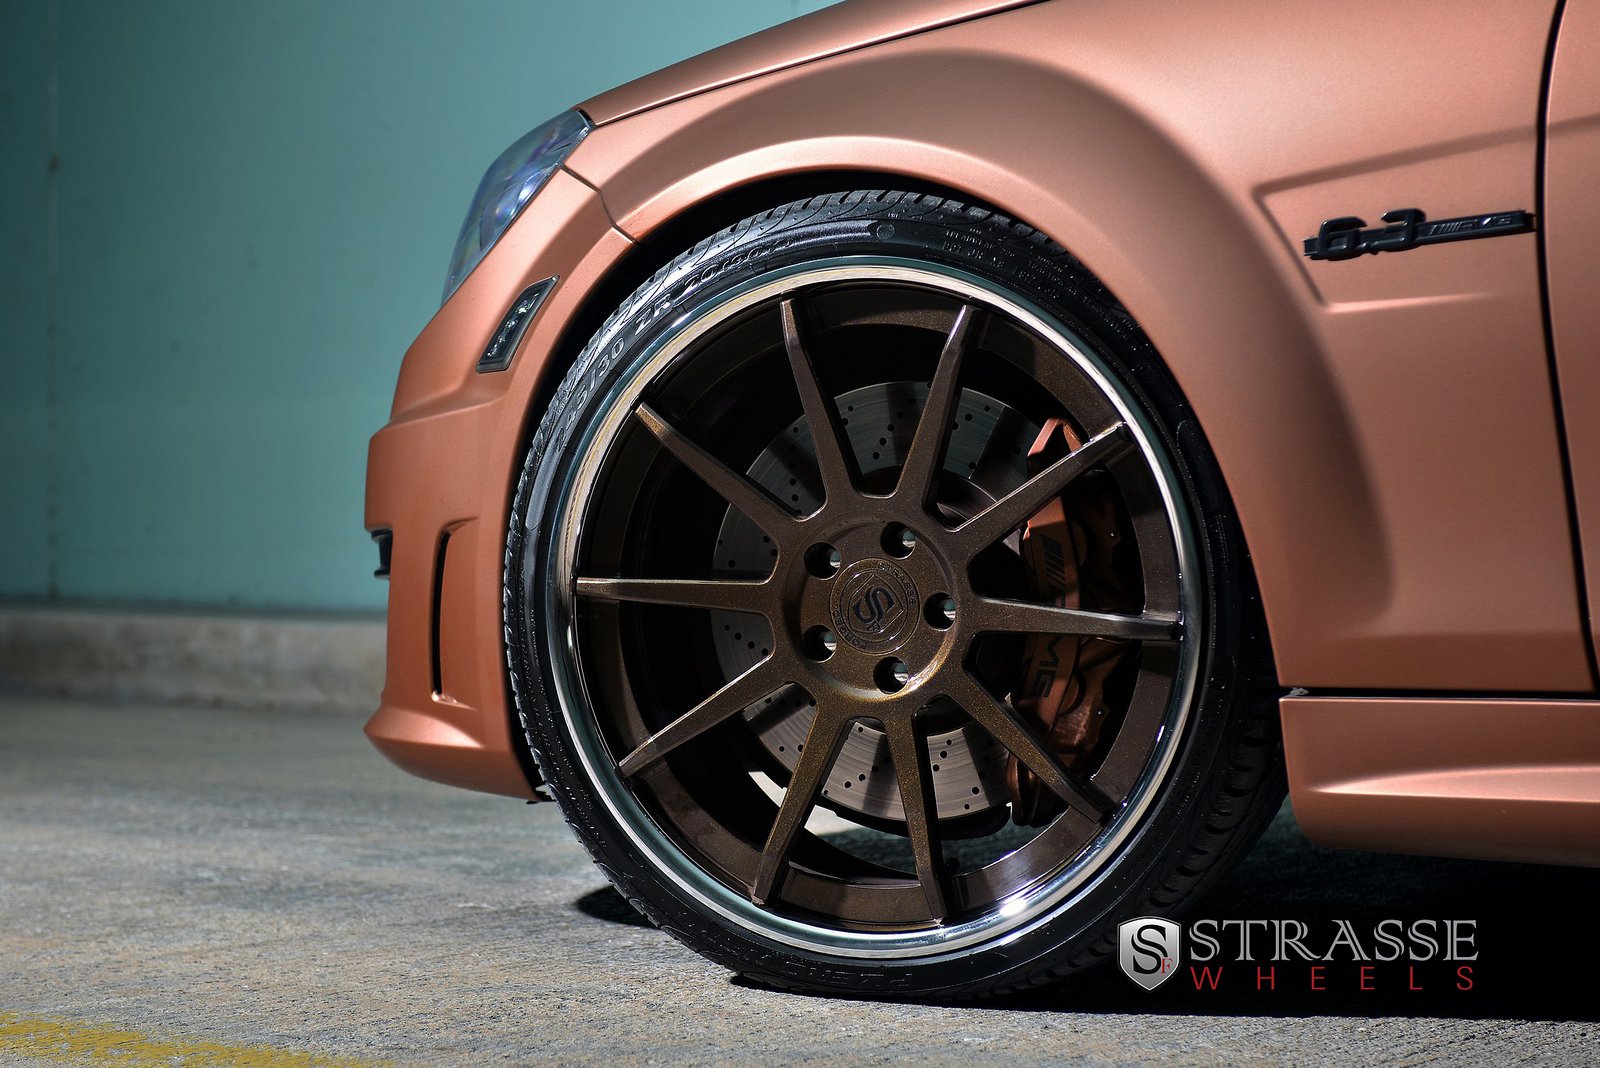 mercedes, C63, Amg, Coupe, Strasse, Wheels, Tuning, Car Wallpaper